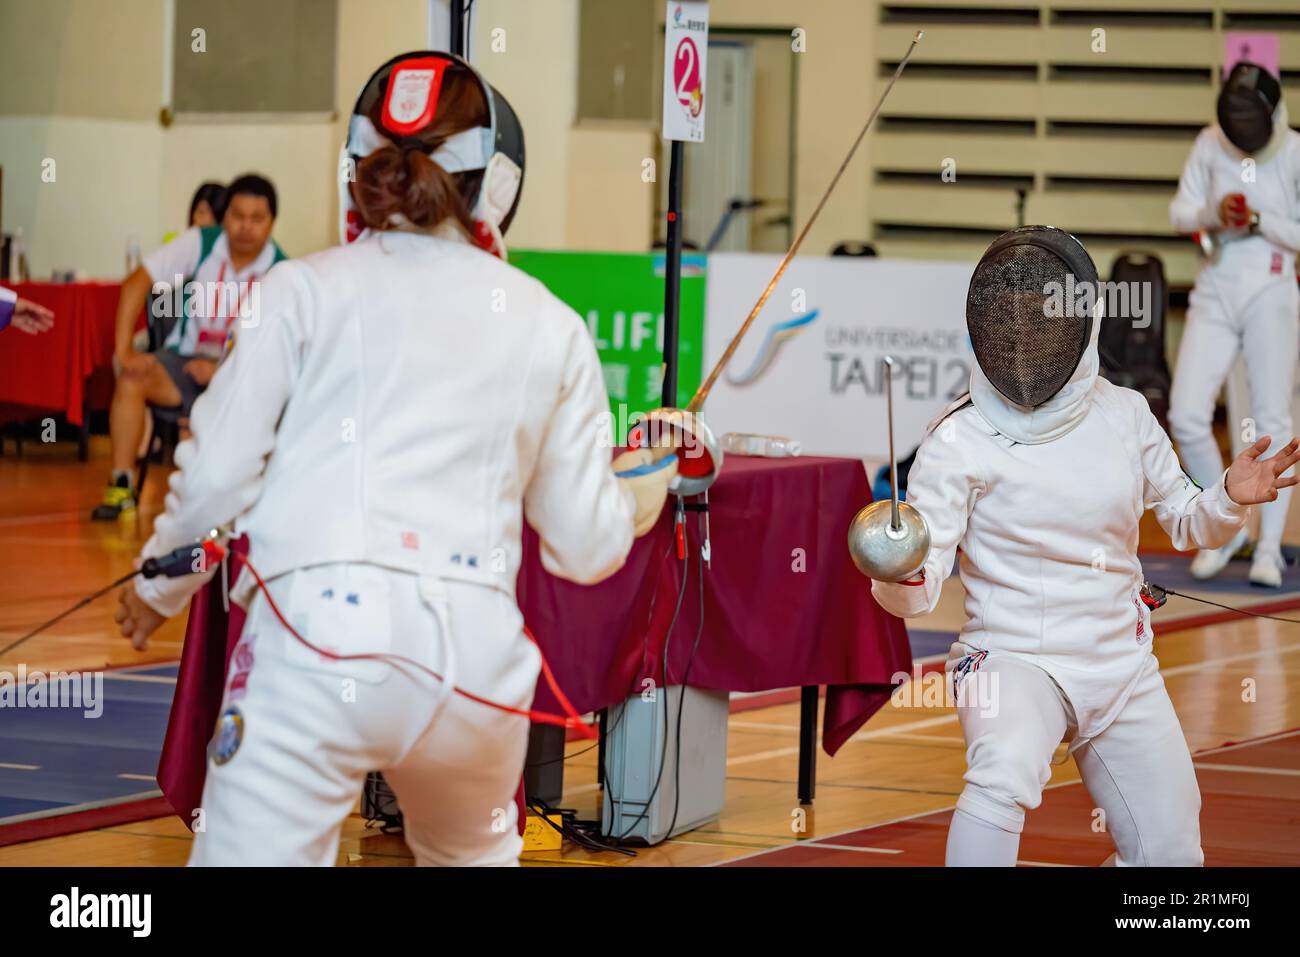 Taiwan, MAR 22 2013 - Fencing competition of The National Games Stock Photo